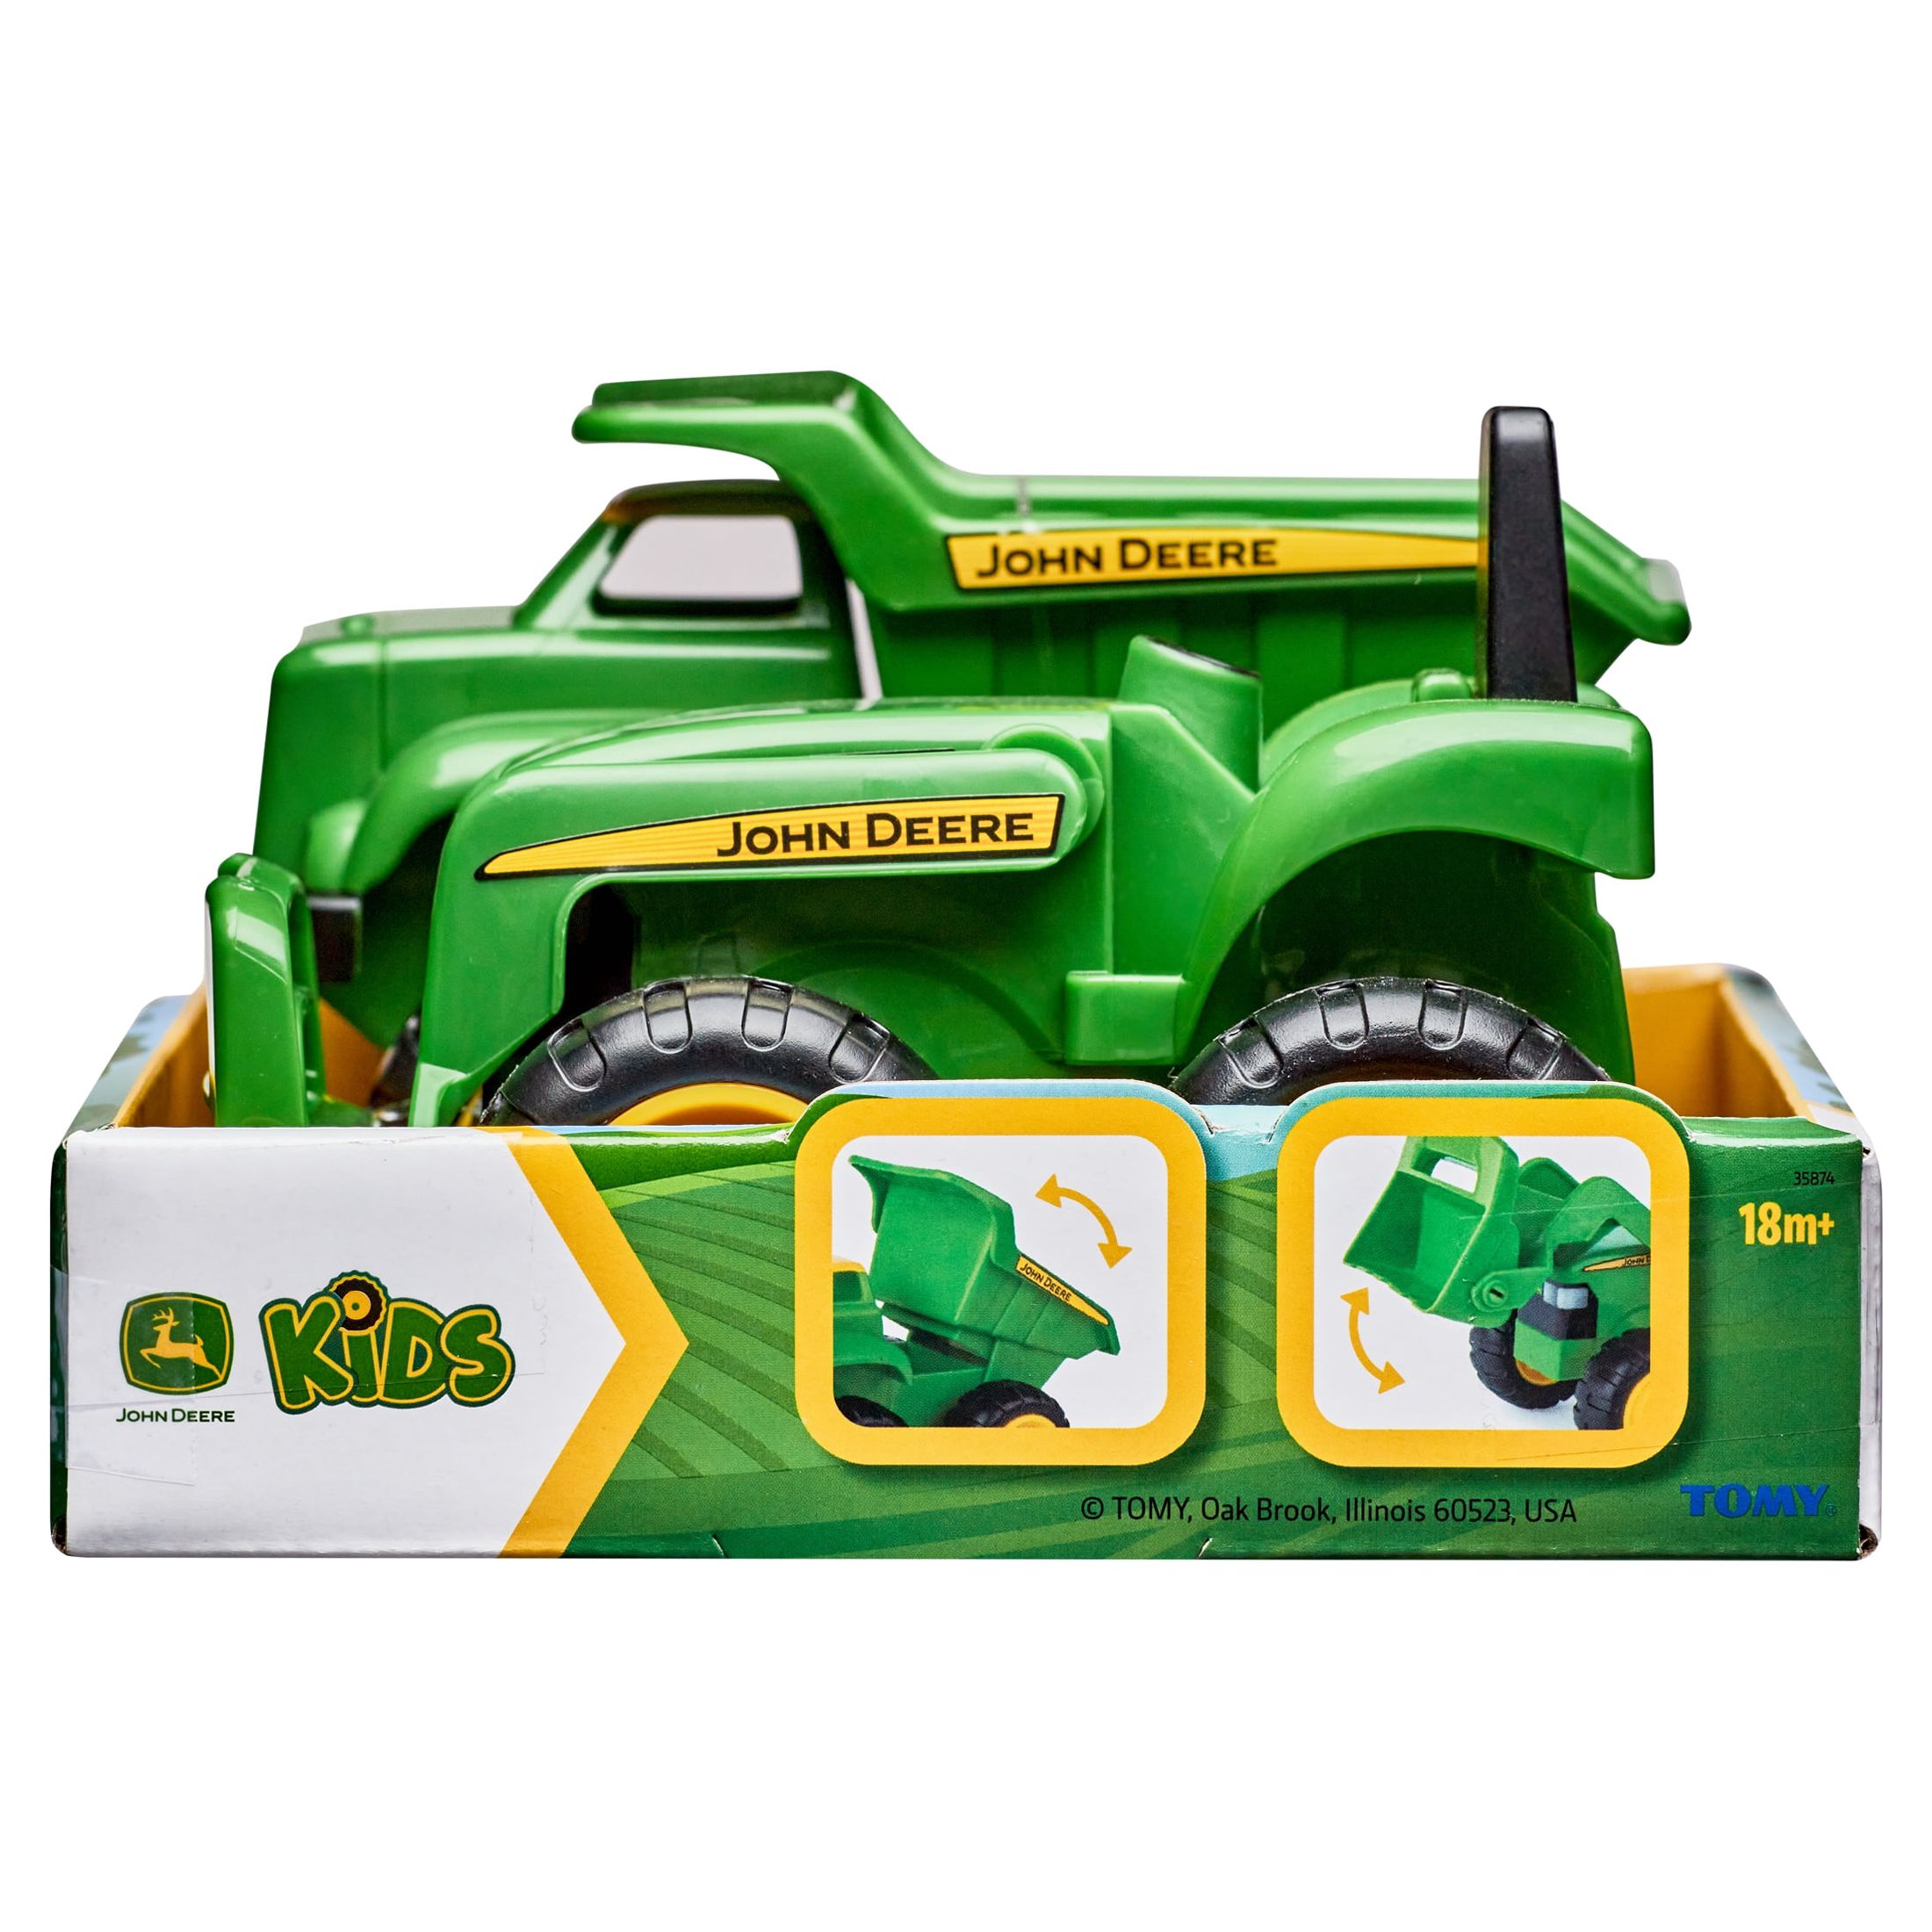 John Deere 6" Sandbox Toy Vehicle Set, Dump Truck and Tractor Toy Vehicles, 2 Pack, Green - image 1 of 13